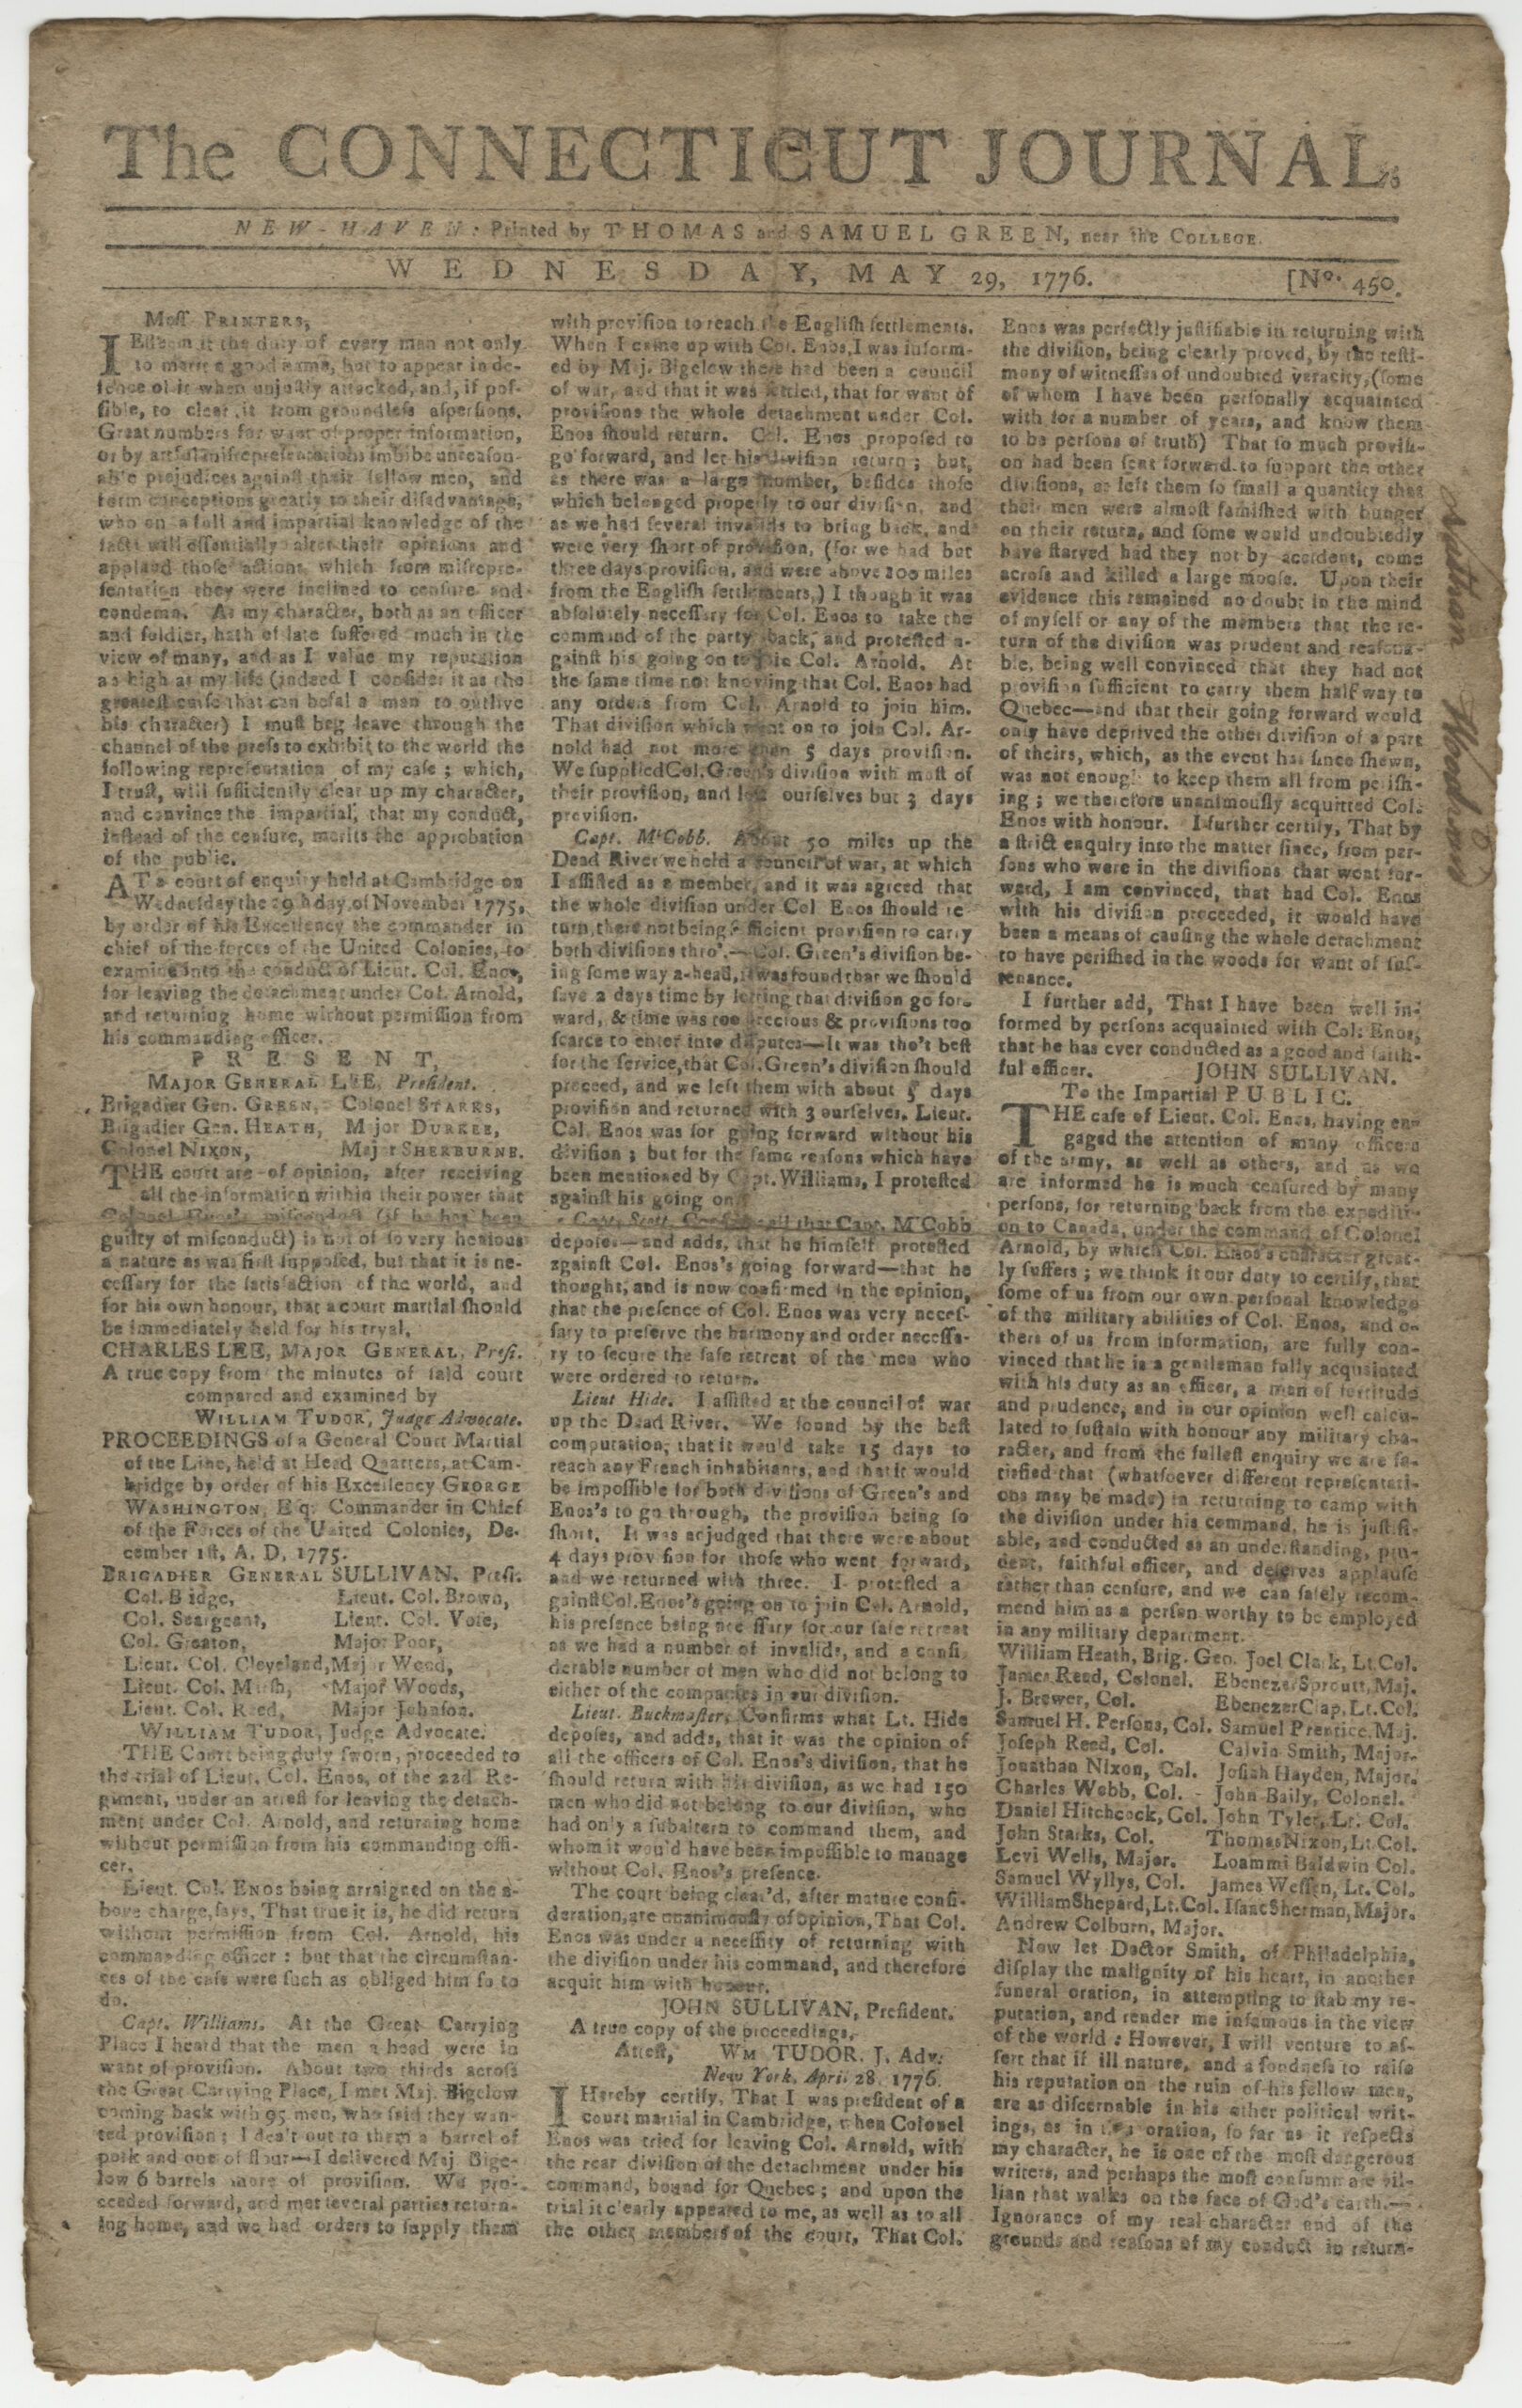 The Connecticut Journal New Haven: Printed by Thomas and Samuel Green, May 29, 1776